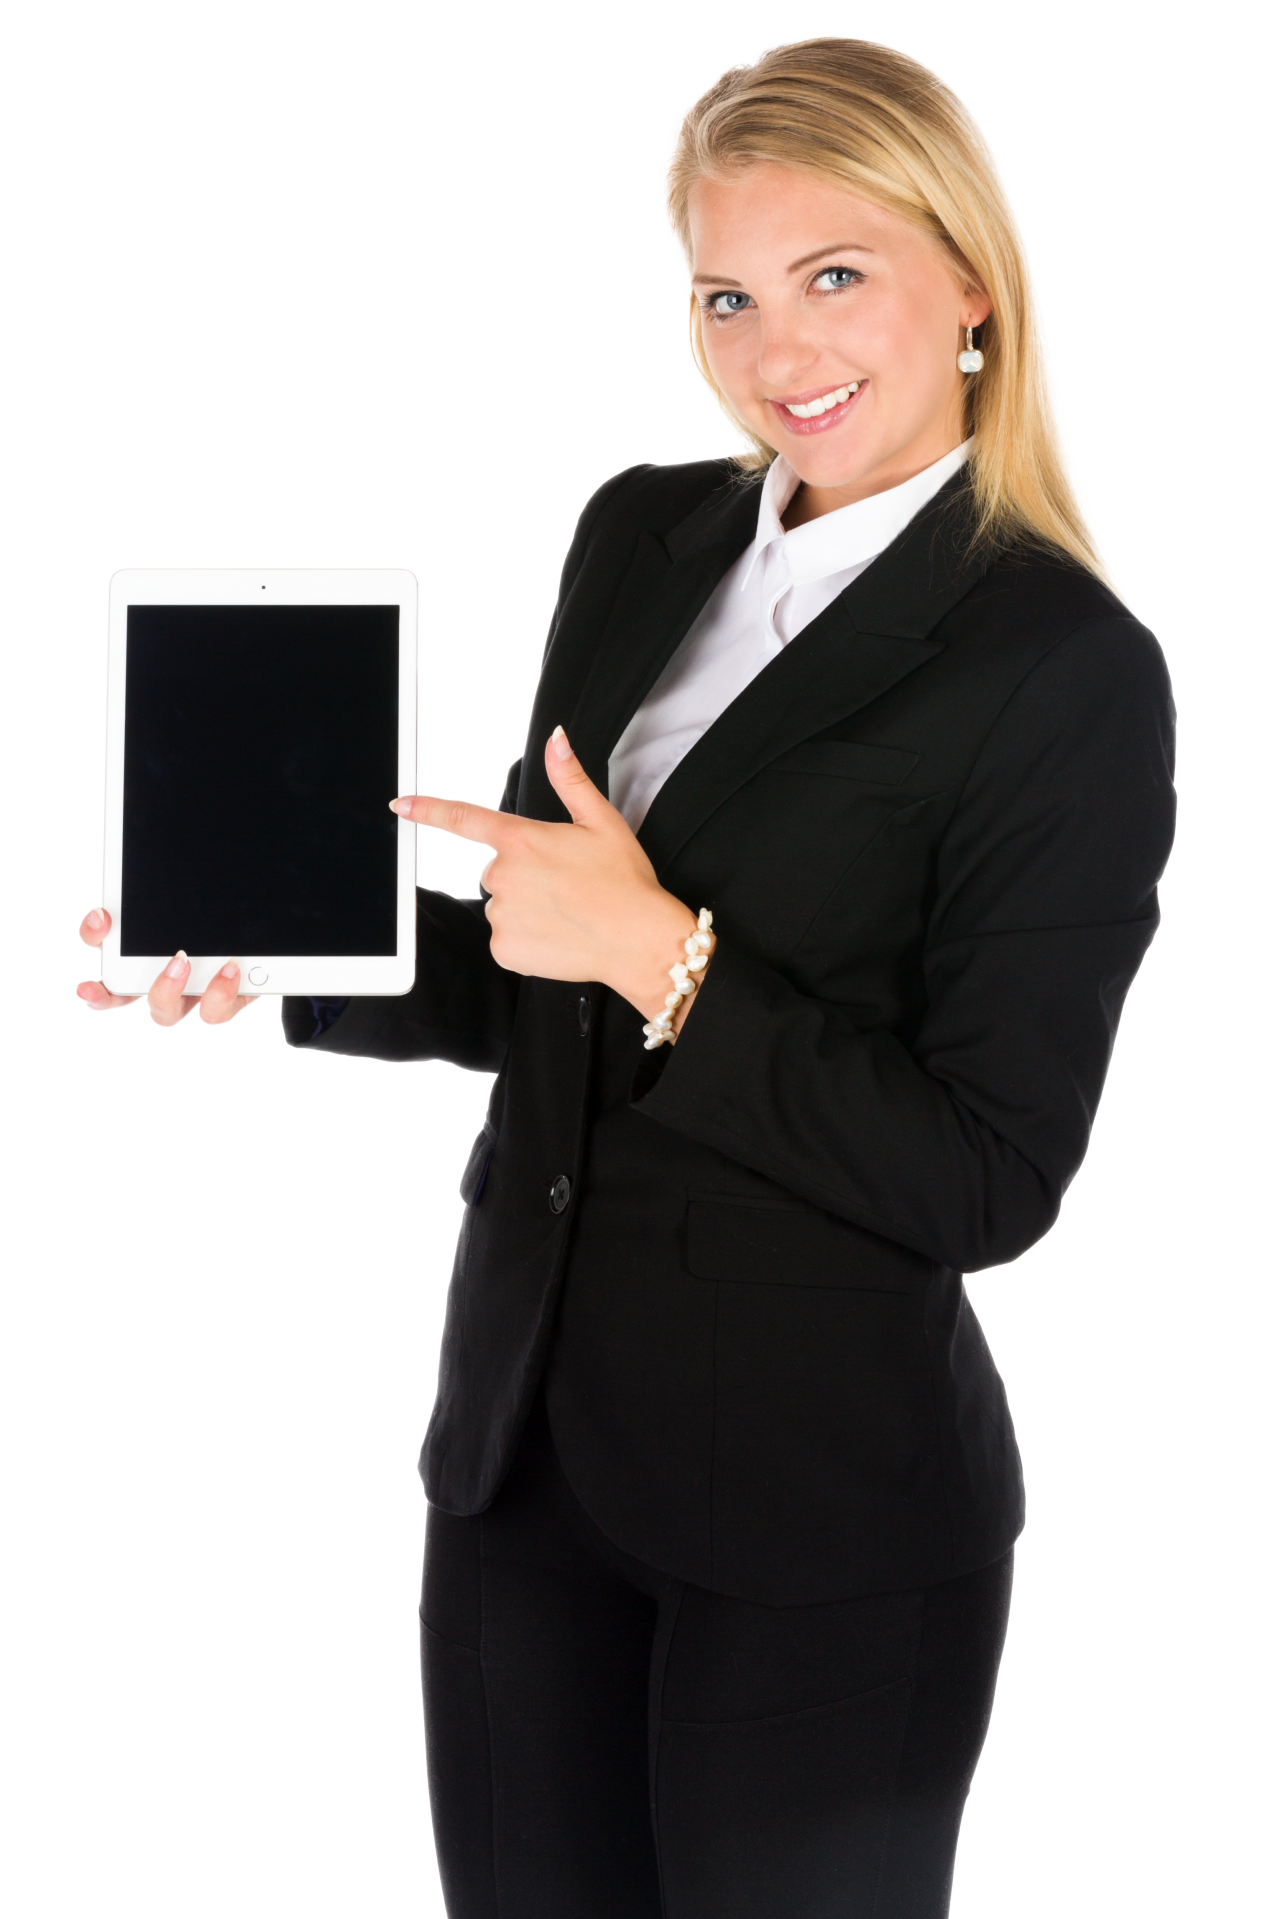 https://www.publicdomainpictures.net/pictures/290000/velka/business-woman-and-a-tablet.png